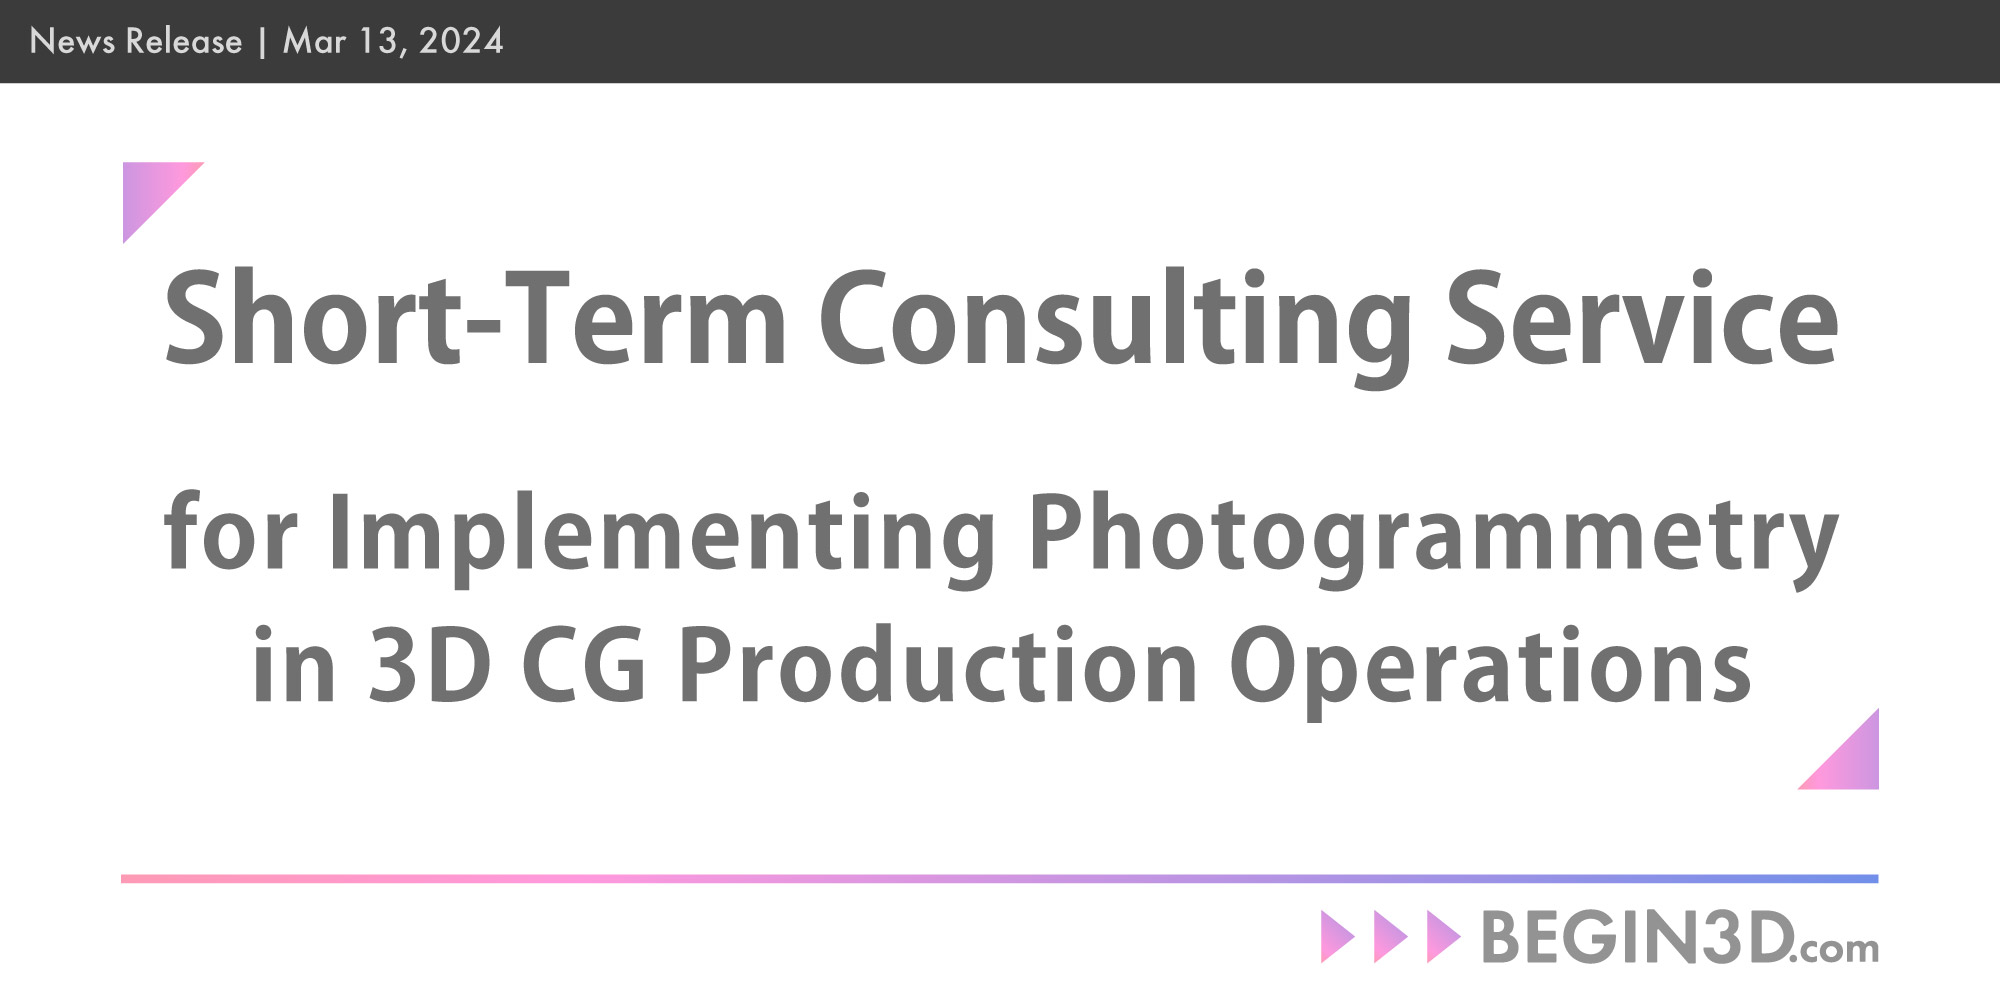 Short-Term Consulting Service for the Implementation of Photogrammetry in 3D CG Production